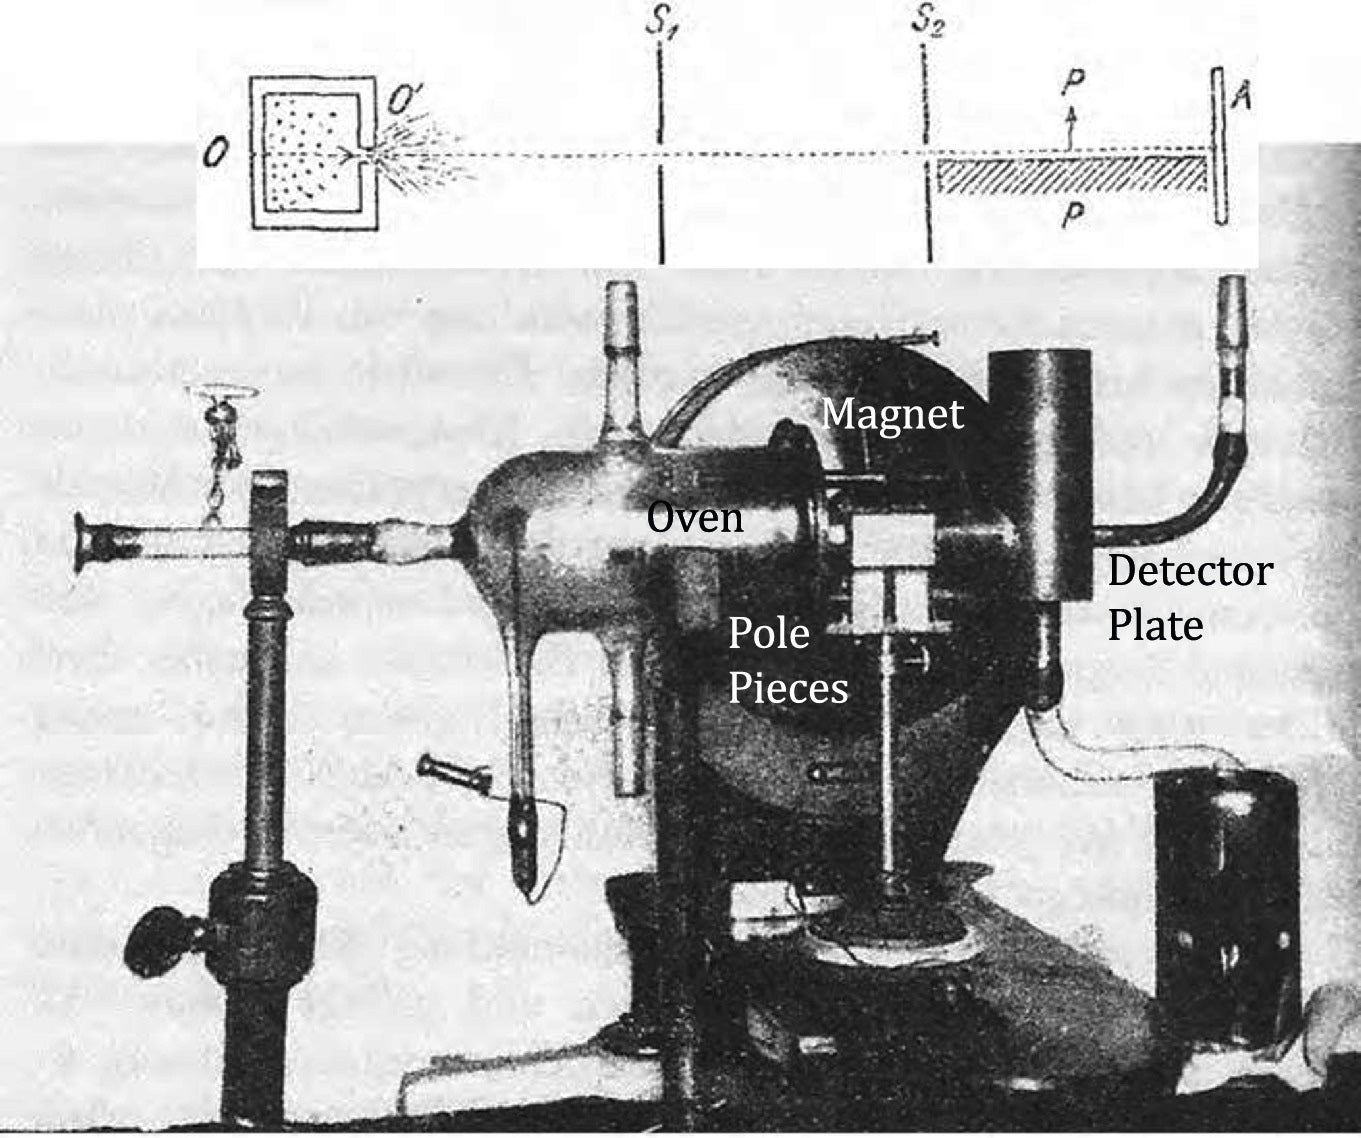 Apparatus used for the Stern-Gerlach experiment in 1922, equipped with modifications made a few years later. The schematic shows a silver beam emerging from an oven (O) and passing through a pinhole (S1) and a rectangular slit (S2). It then enters a magnetic field, whose direction is indicated by the arrow between the two pole pieces (P), and finally reaches a detector plate (A).